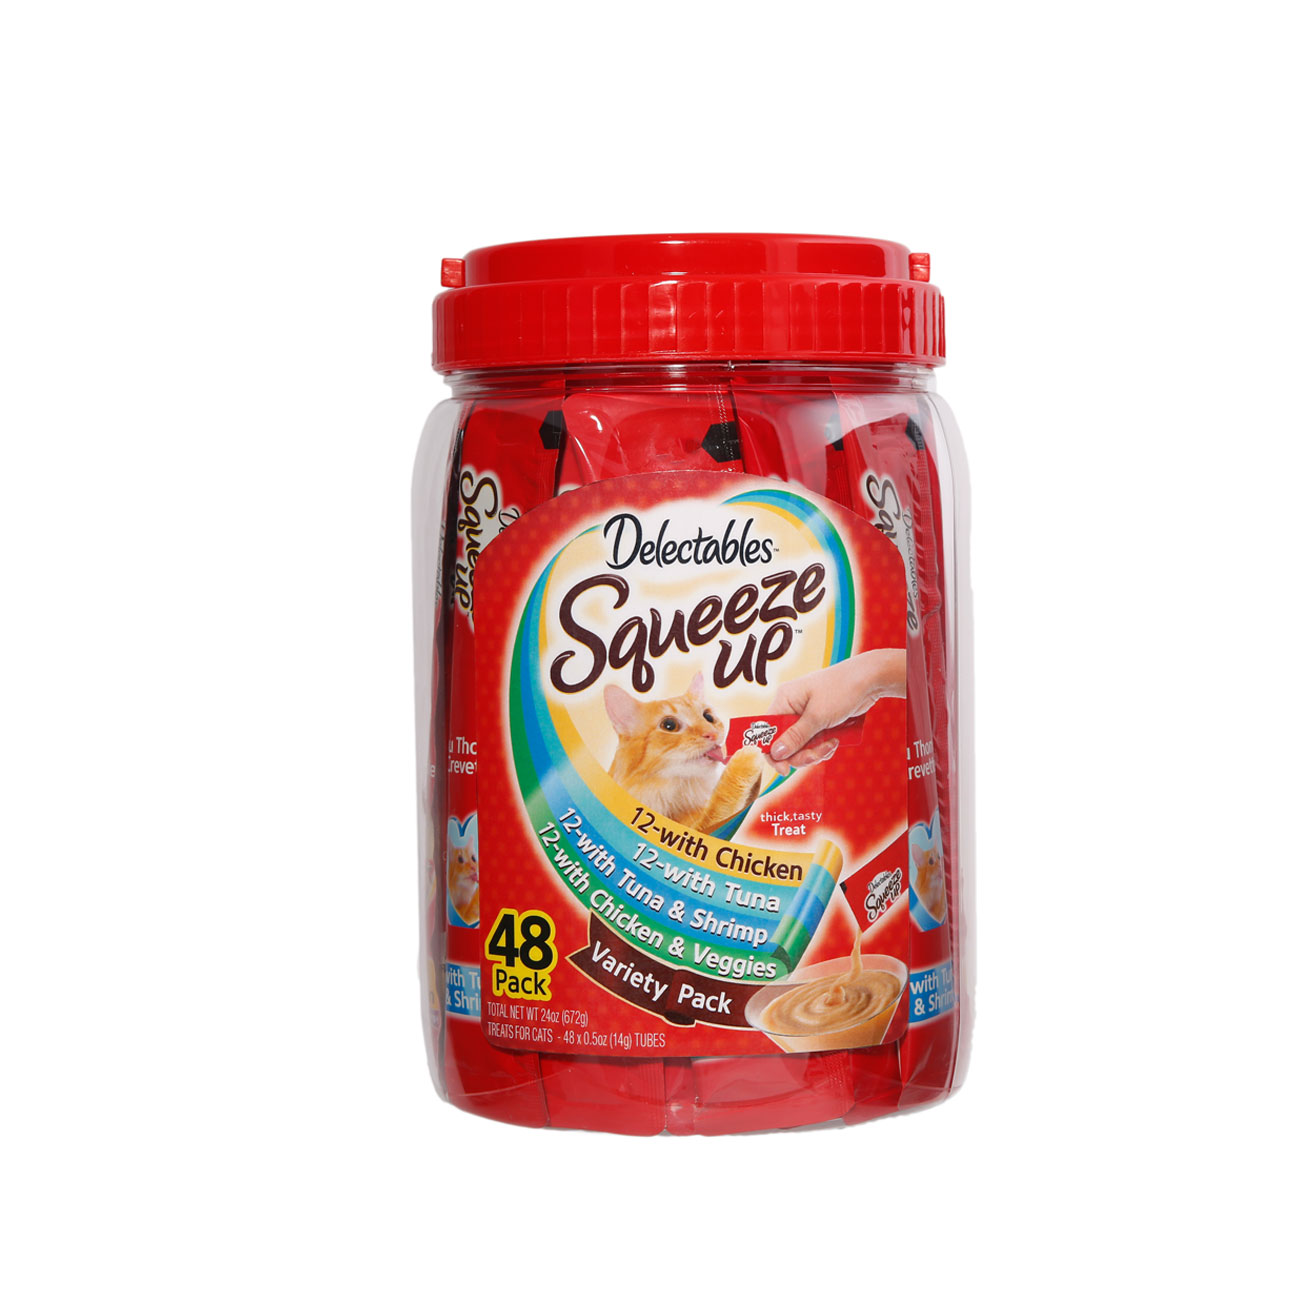 Hartz delectables squeeze up 48 count variety pack. A interactive cat treat and lickable cat treat. A squeeze cat treat from Hartz.